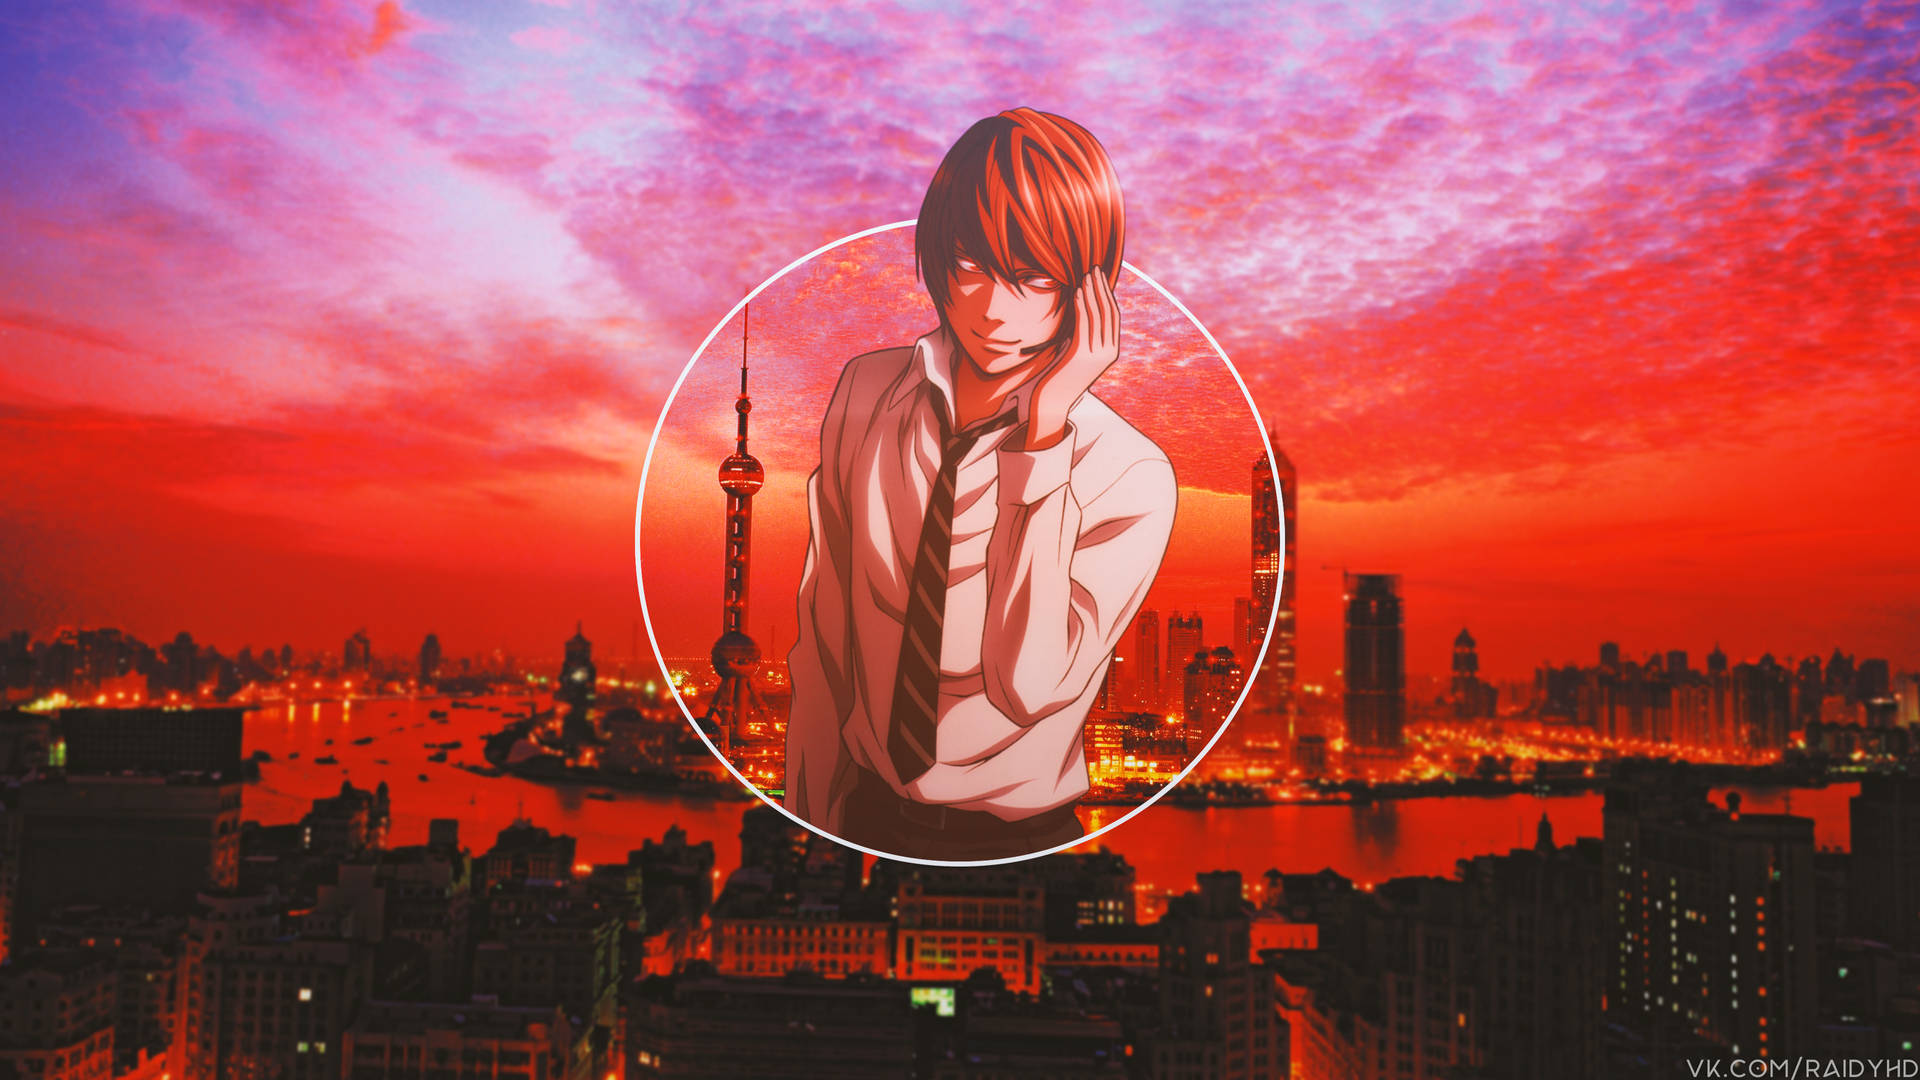 Aesthetic Sky With Light Yagami Background